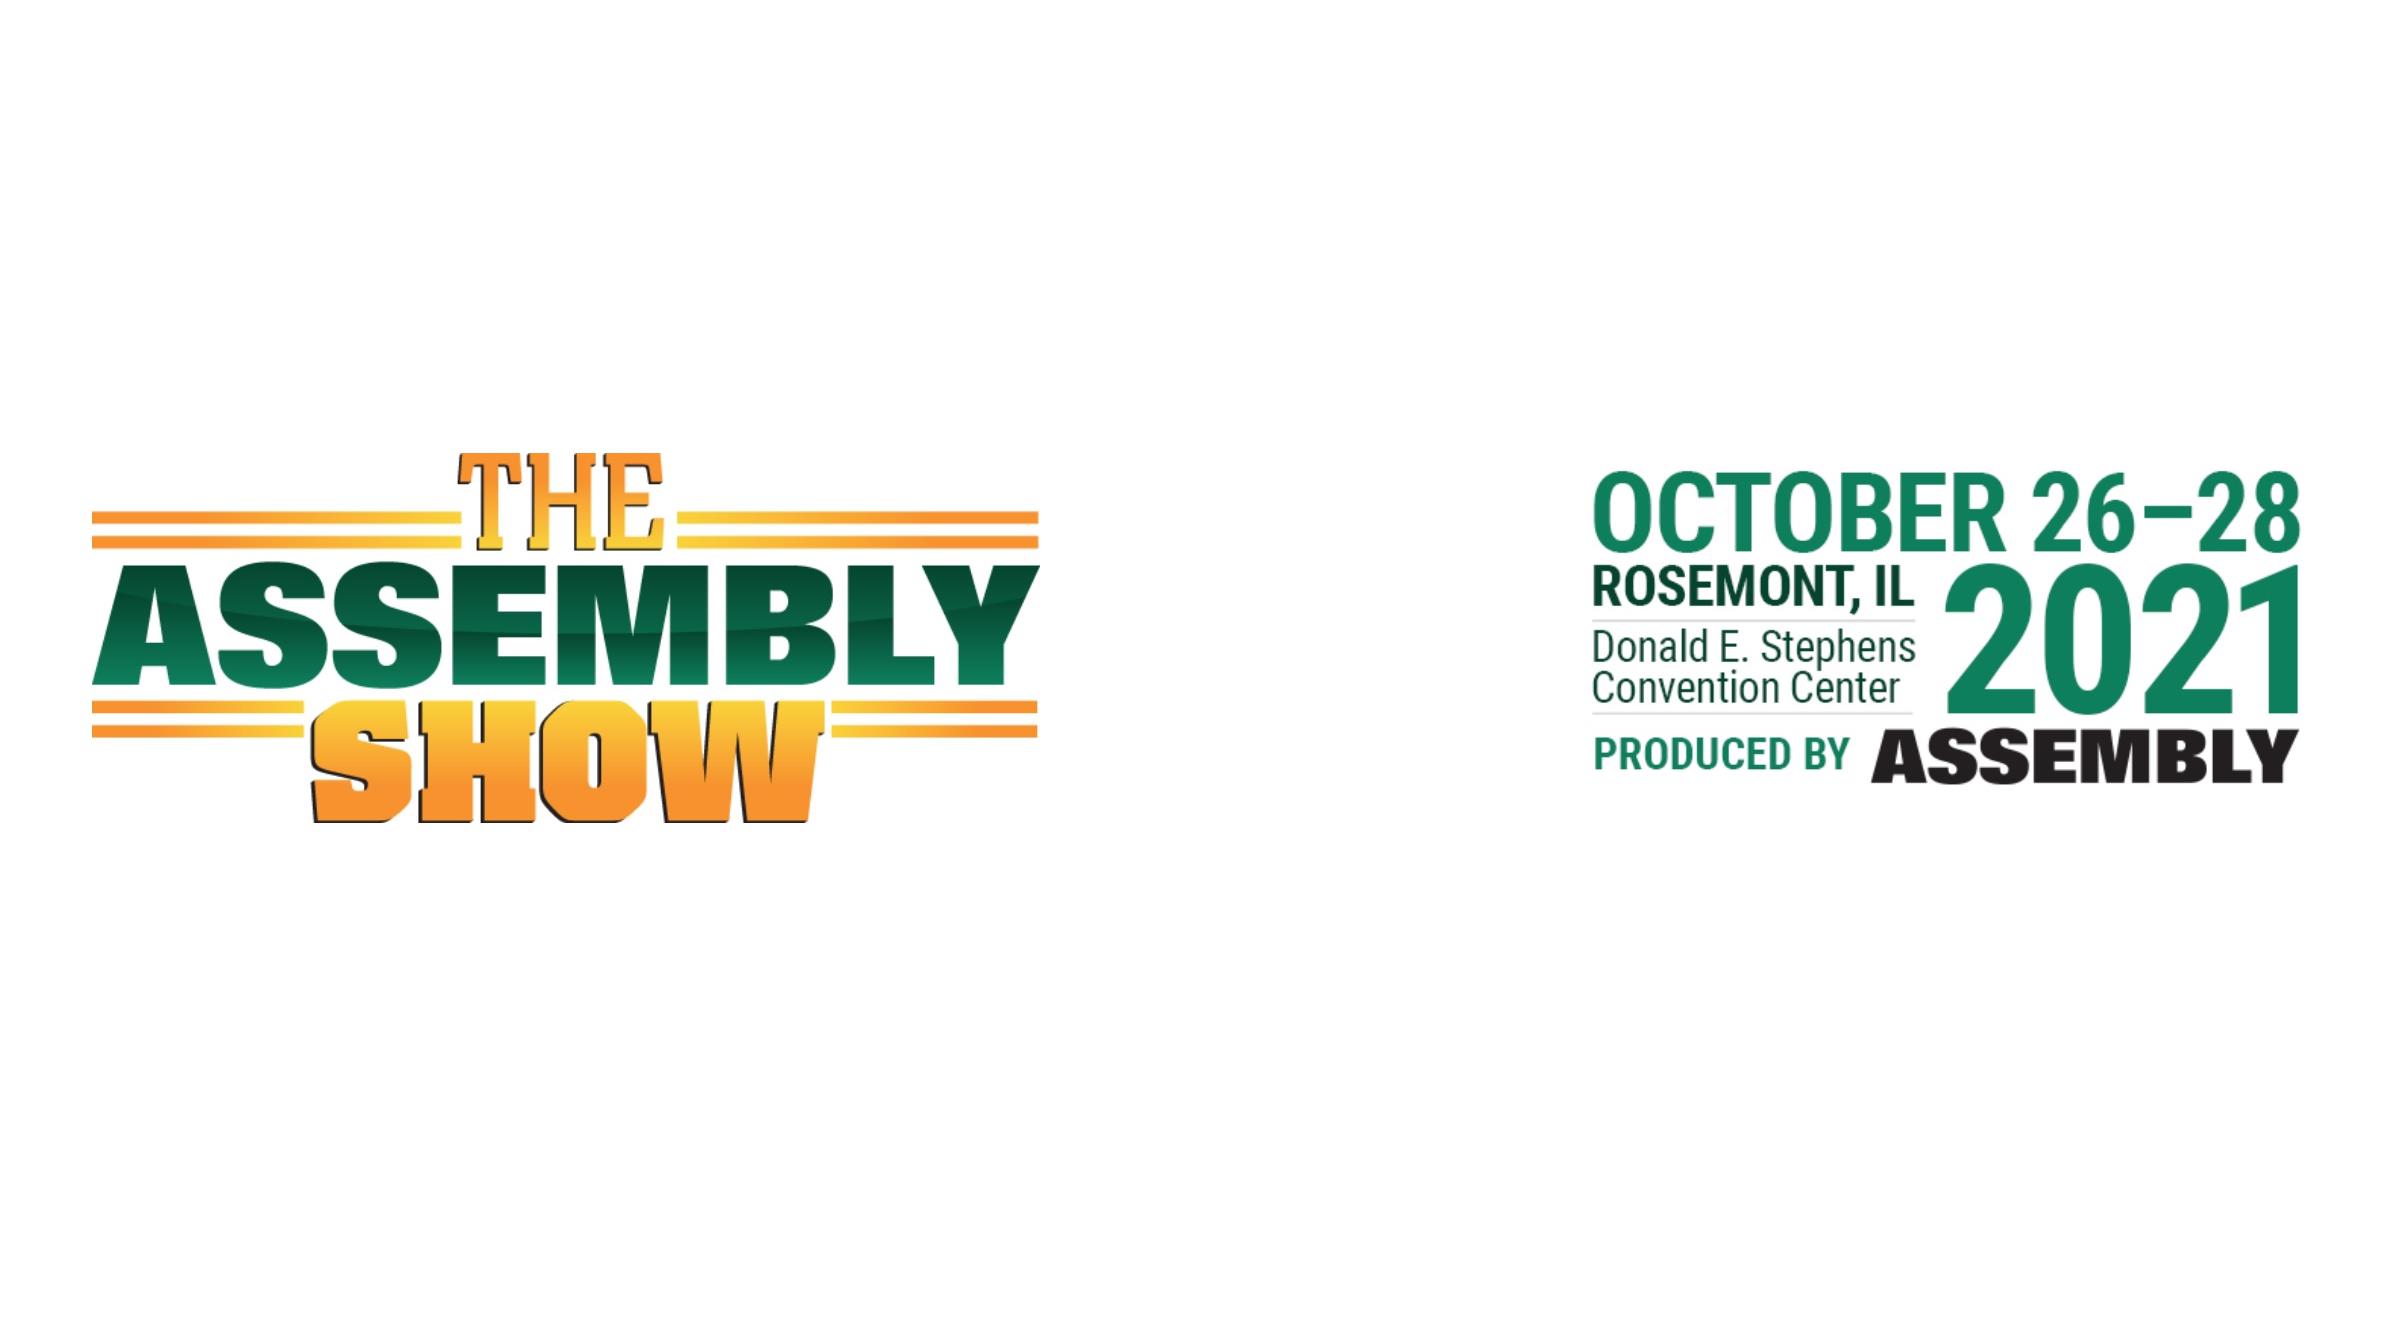 Join Thousands of Manufacturing Professionals from Leading Companies at The 2022 ASSEMBLY Show Taking Place this October in Rosemont, IL